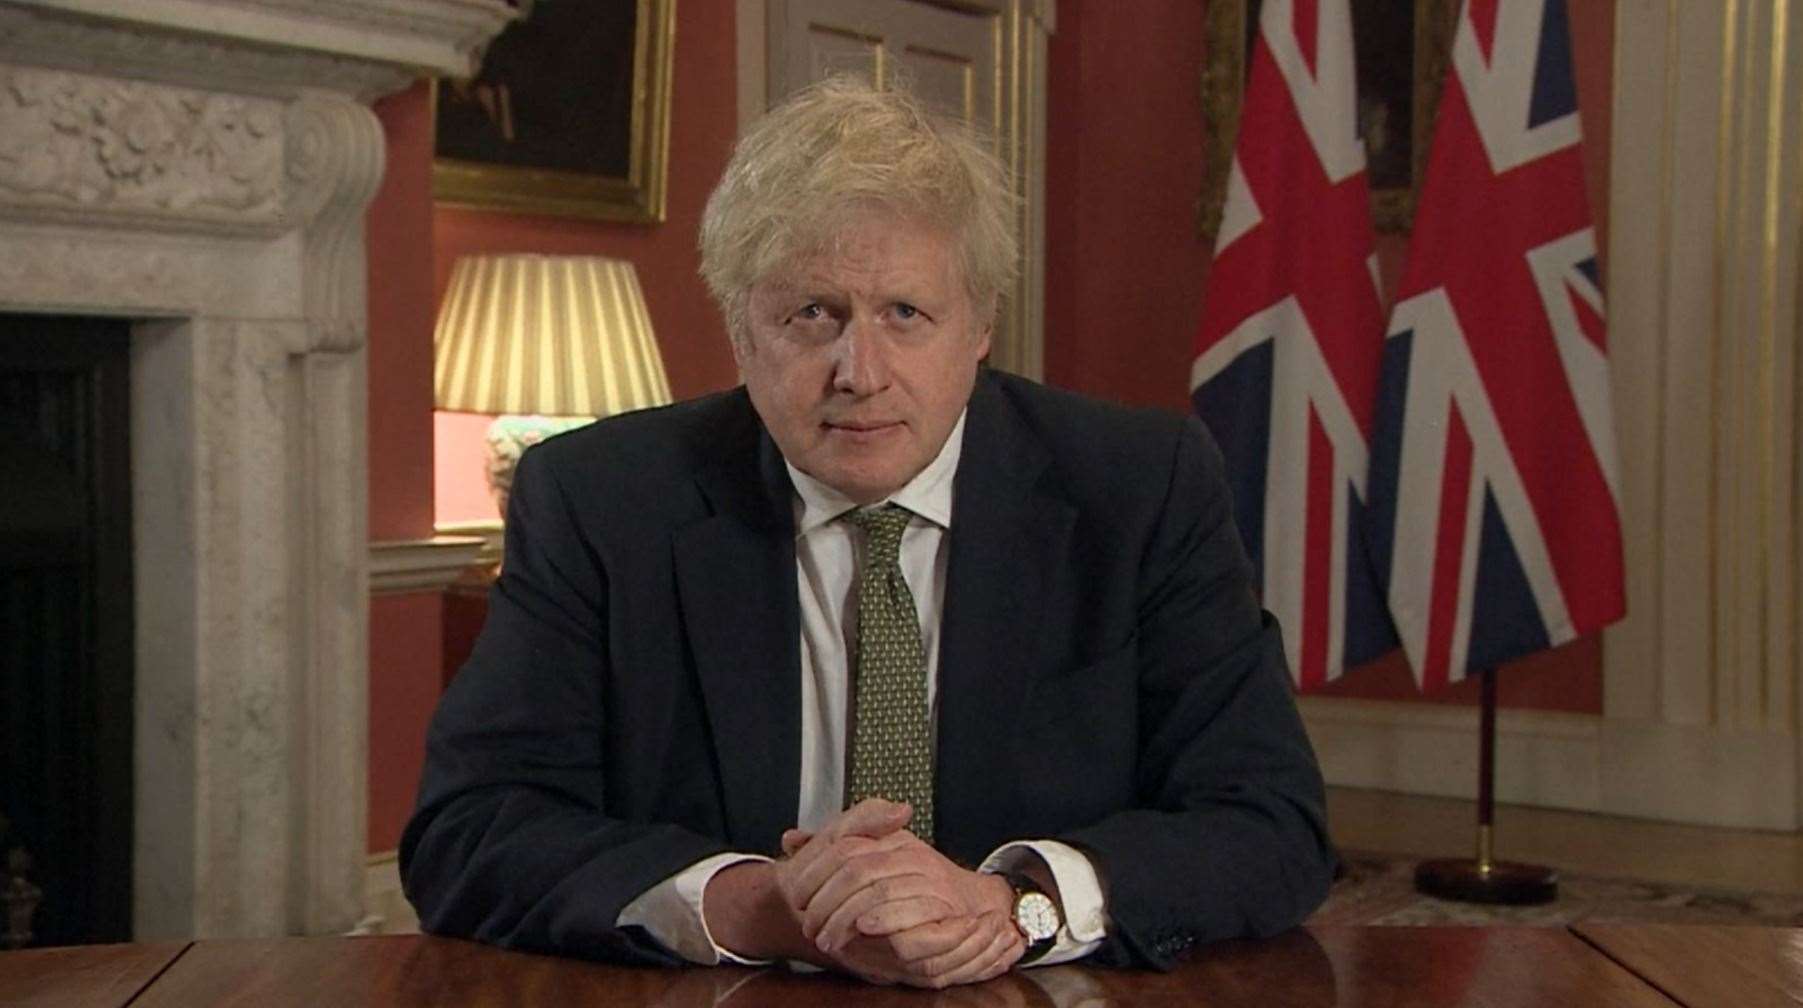 Prime Minister Boris Johnson making a televised address to the nation from 10 Downing Street